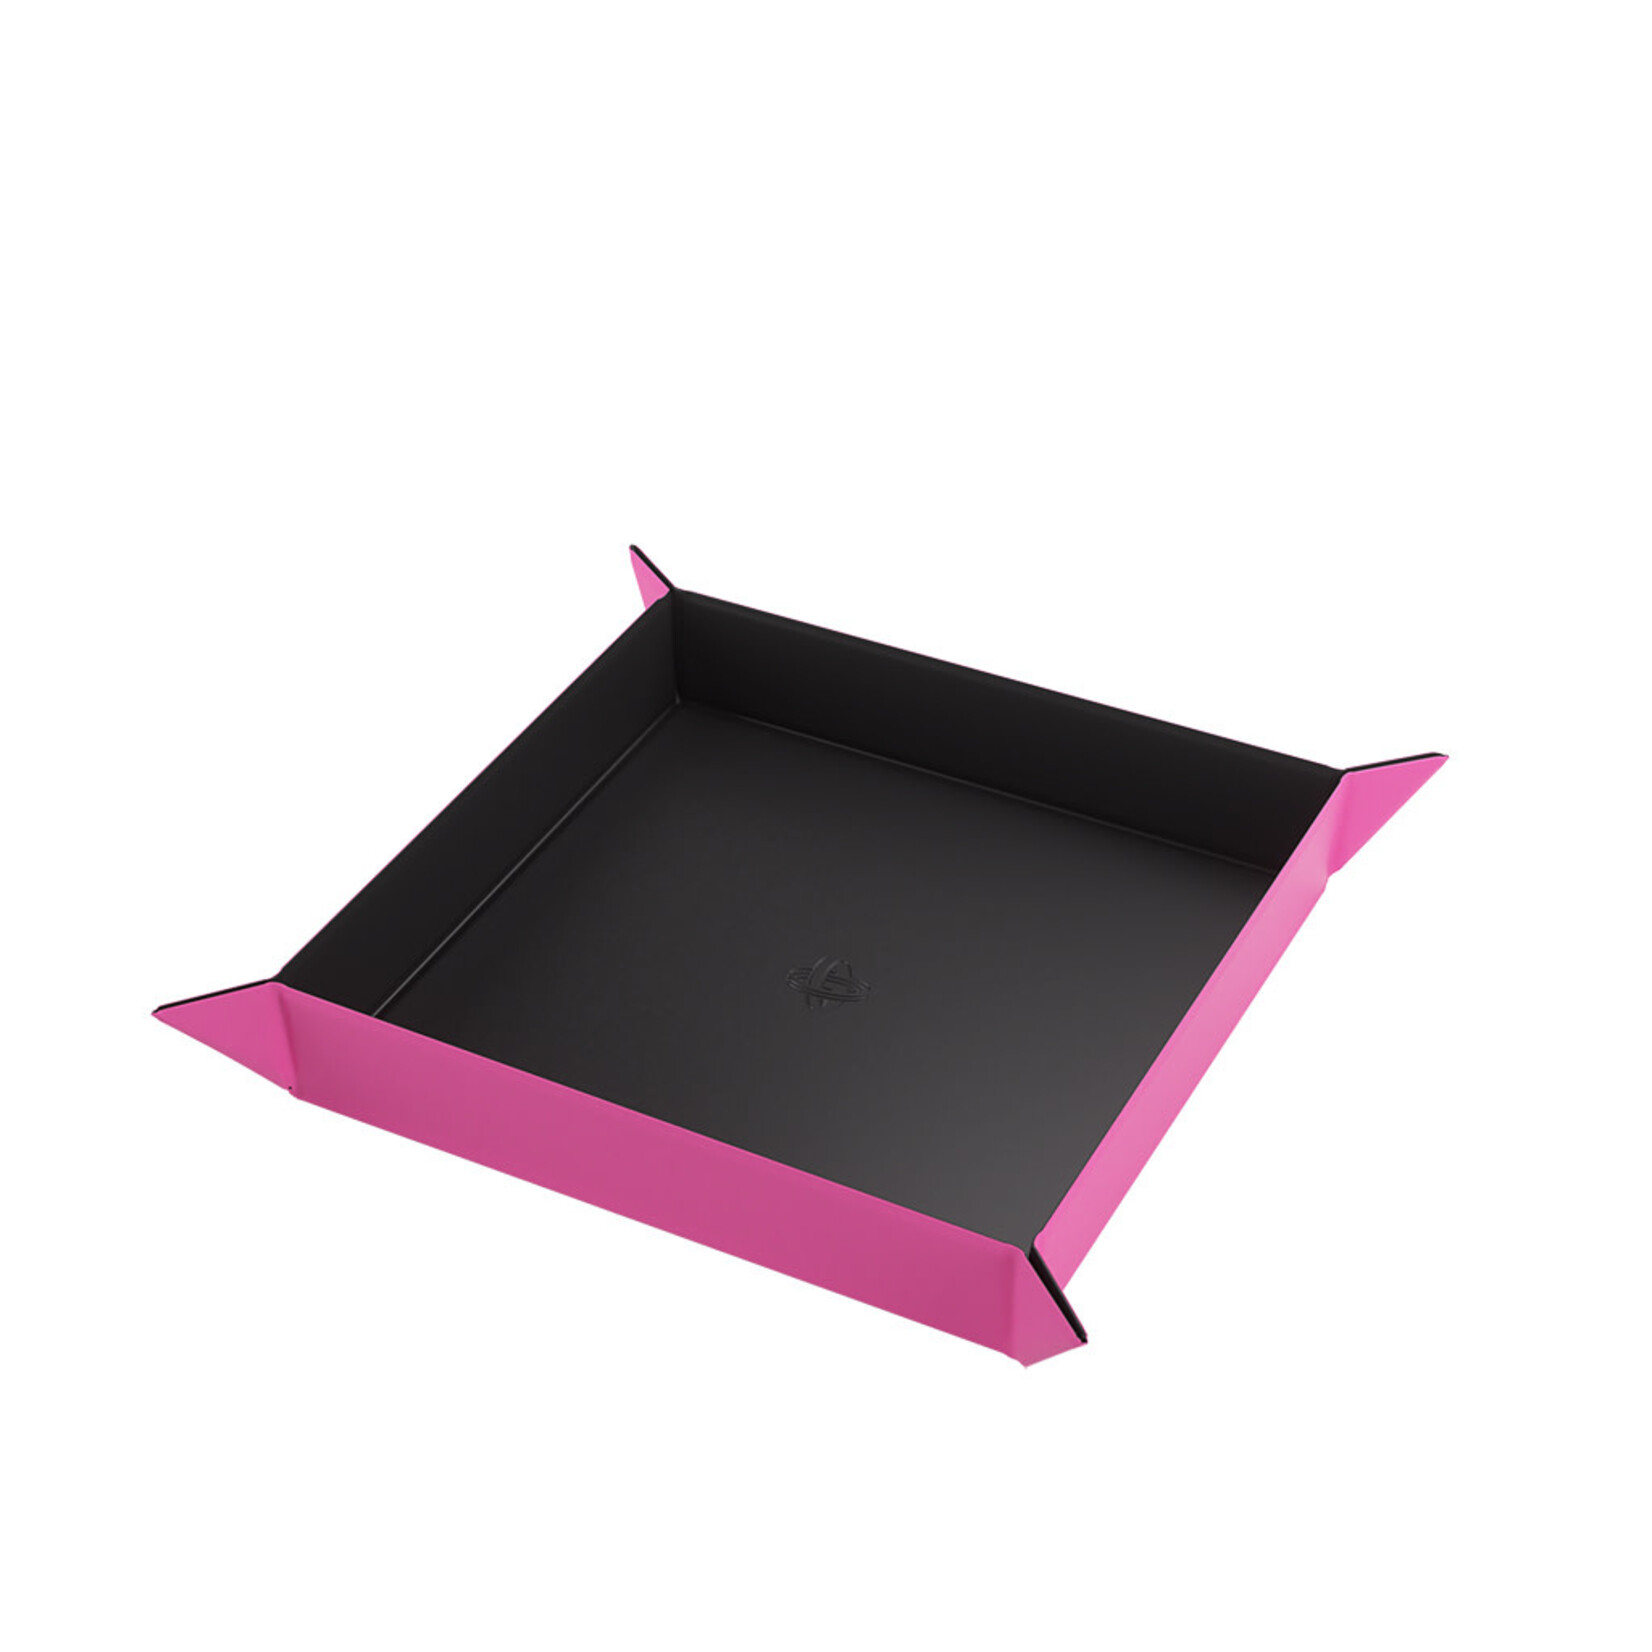 Magnetic Dice Tray Black/Pink Gamegenic